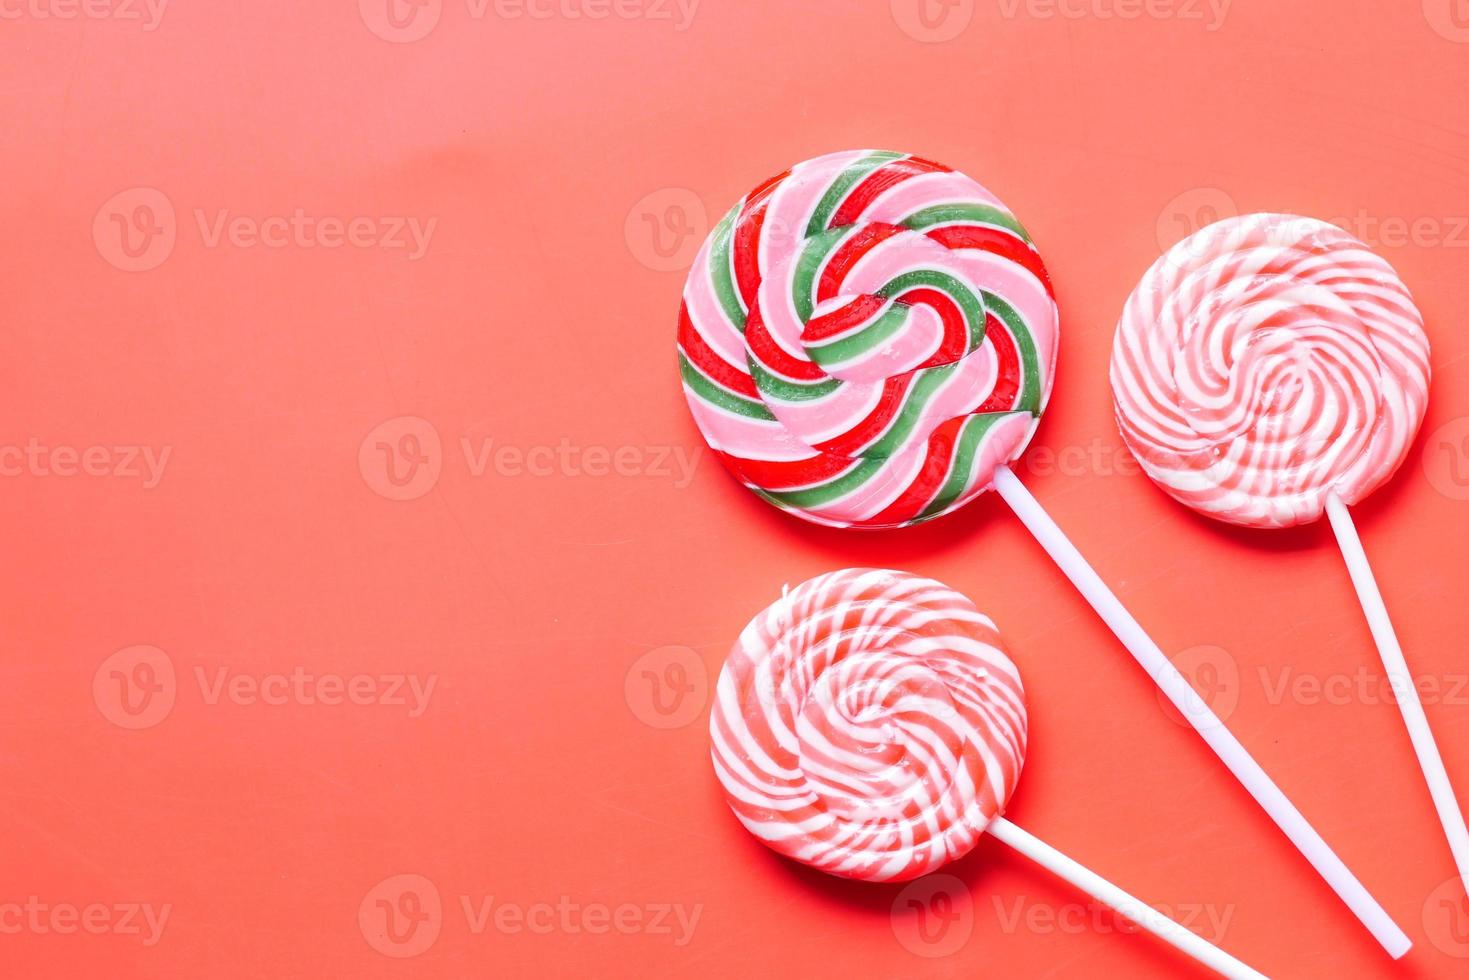 close up of lollipop candy on table photo